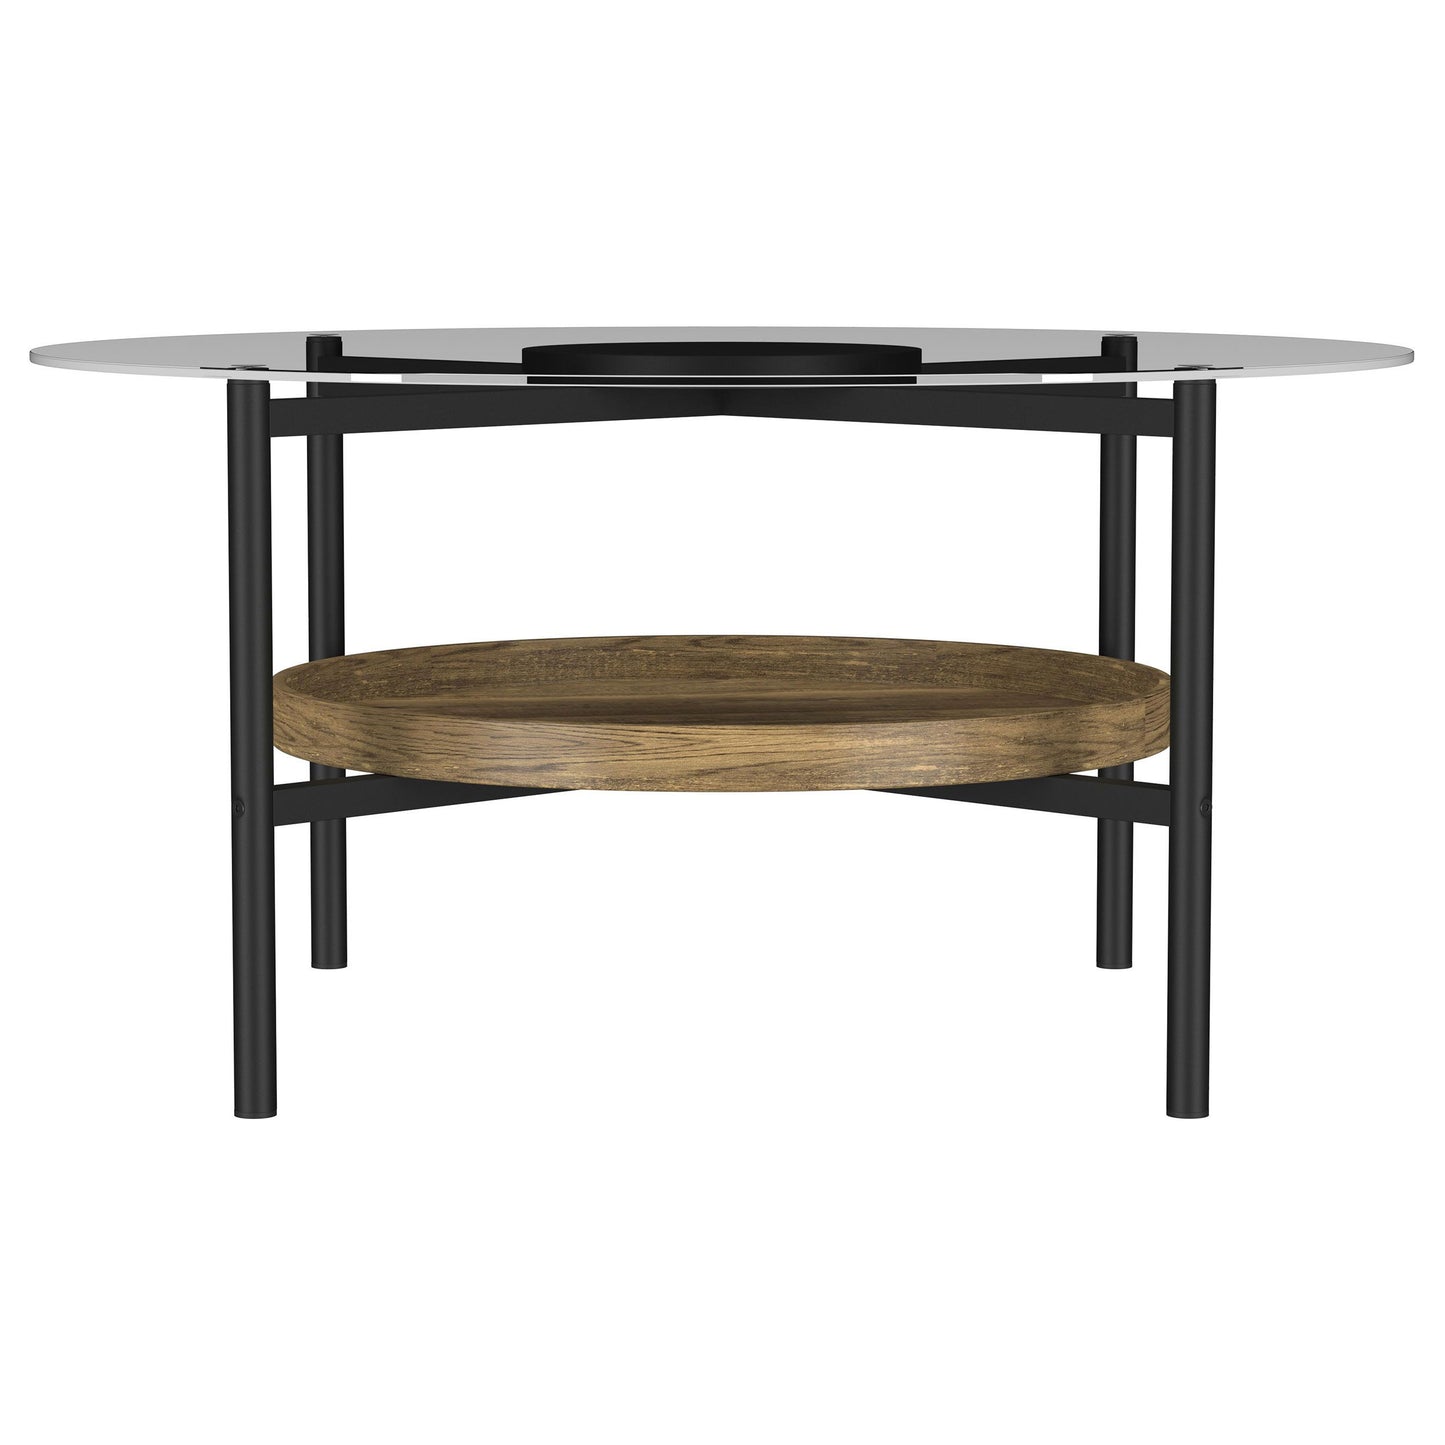 Delfin - Round Glass Top Coffee Table With Shelf - Black / Brown